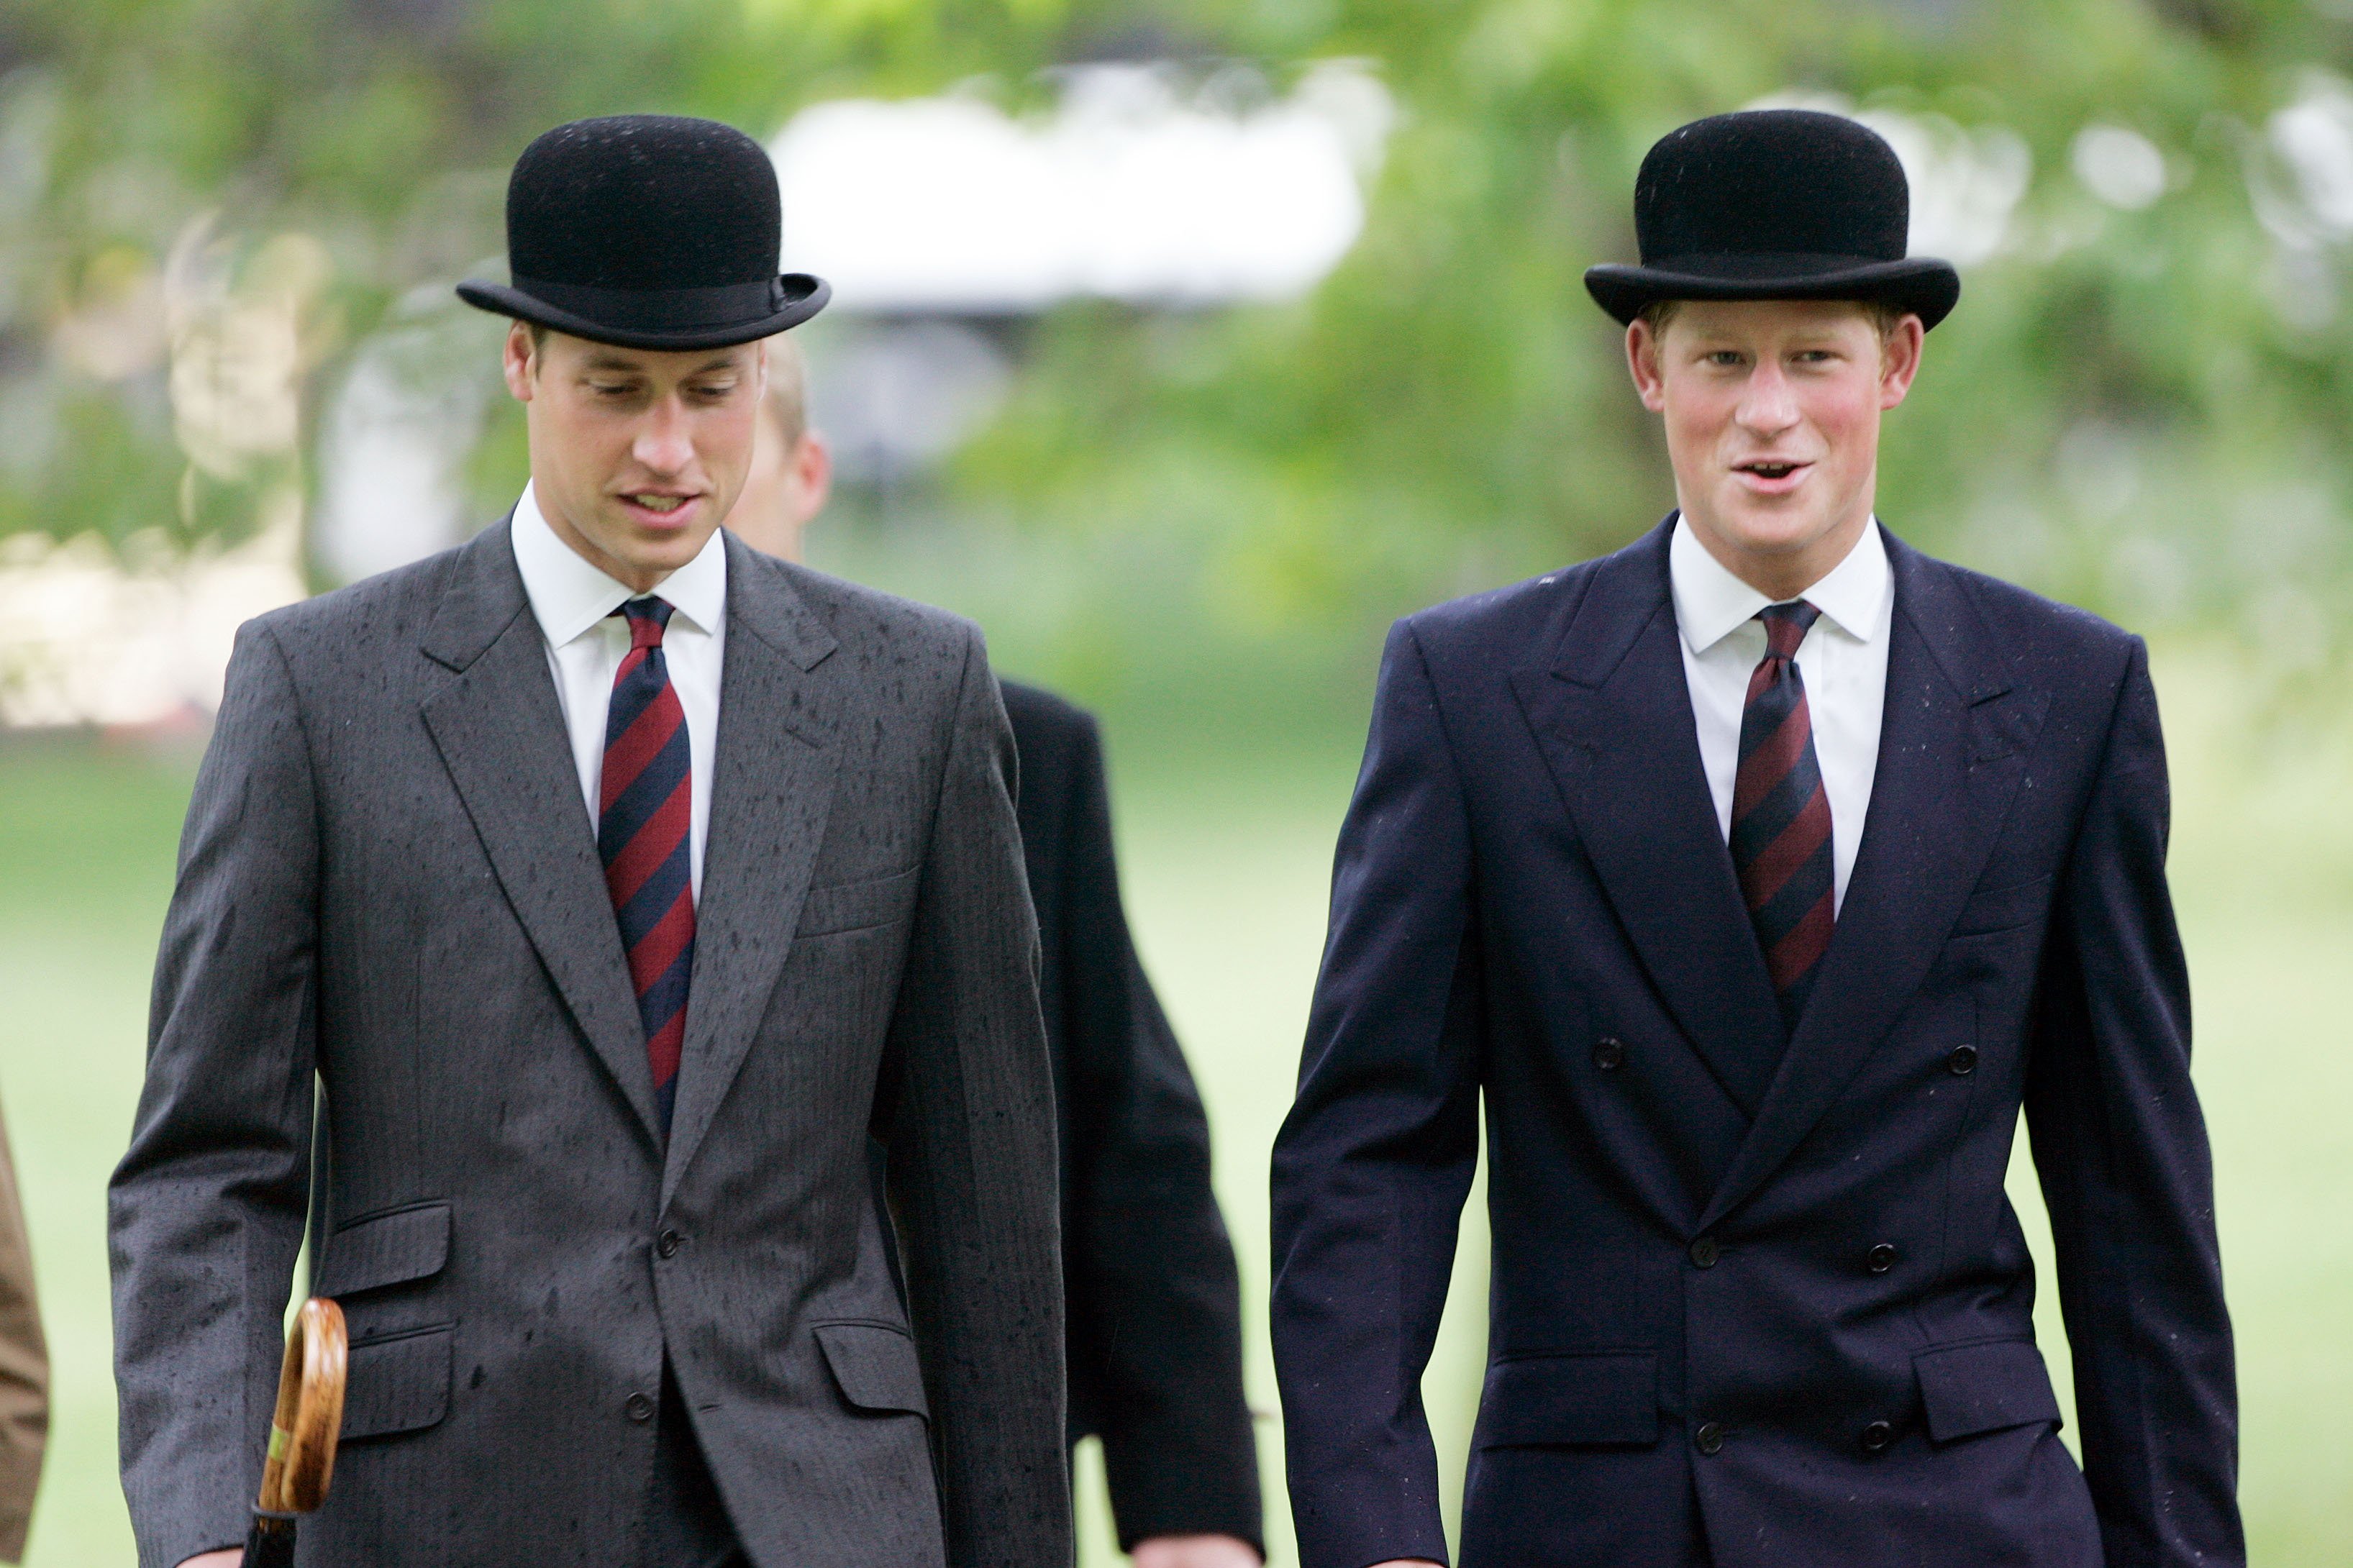 Prince William and Prince Harry, with regimental ties and traditional bowler hats, attend the Combined Cavalry Old Comrades Association parade in Hyde Park on May 13, 2007, in London, England. | Source: Getty Images